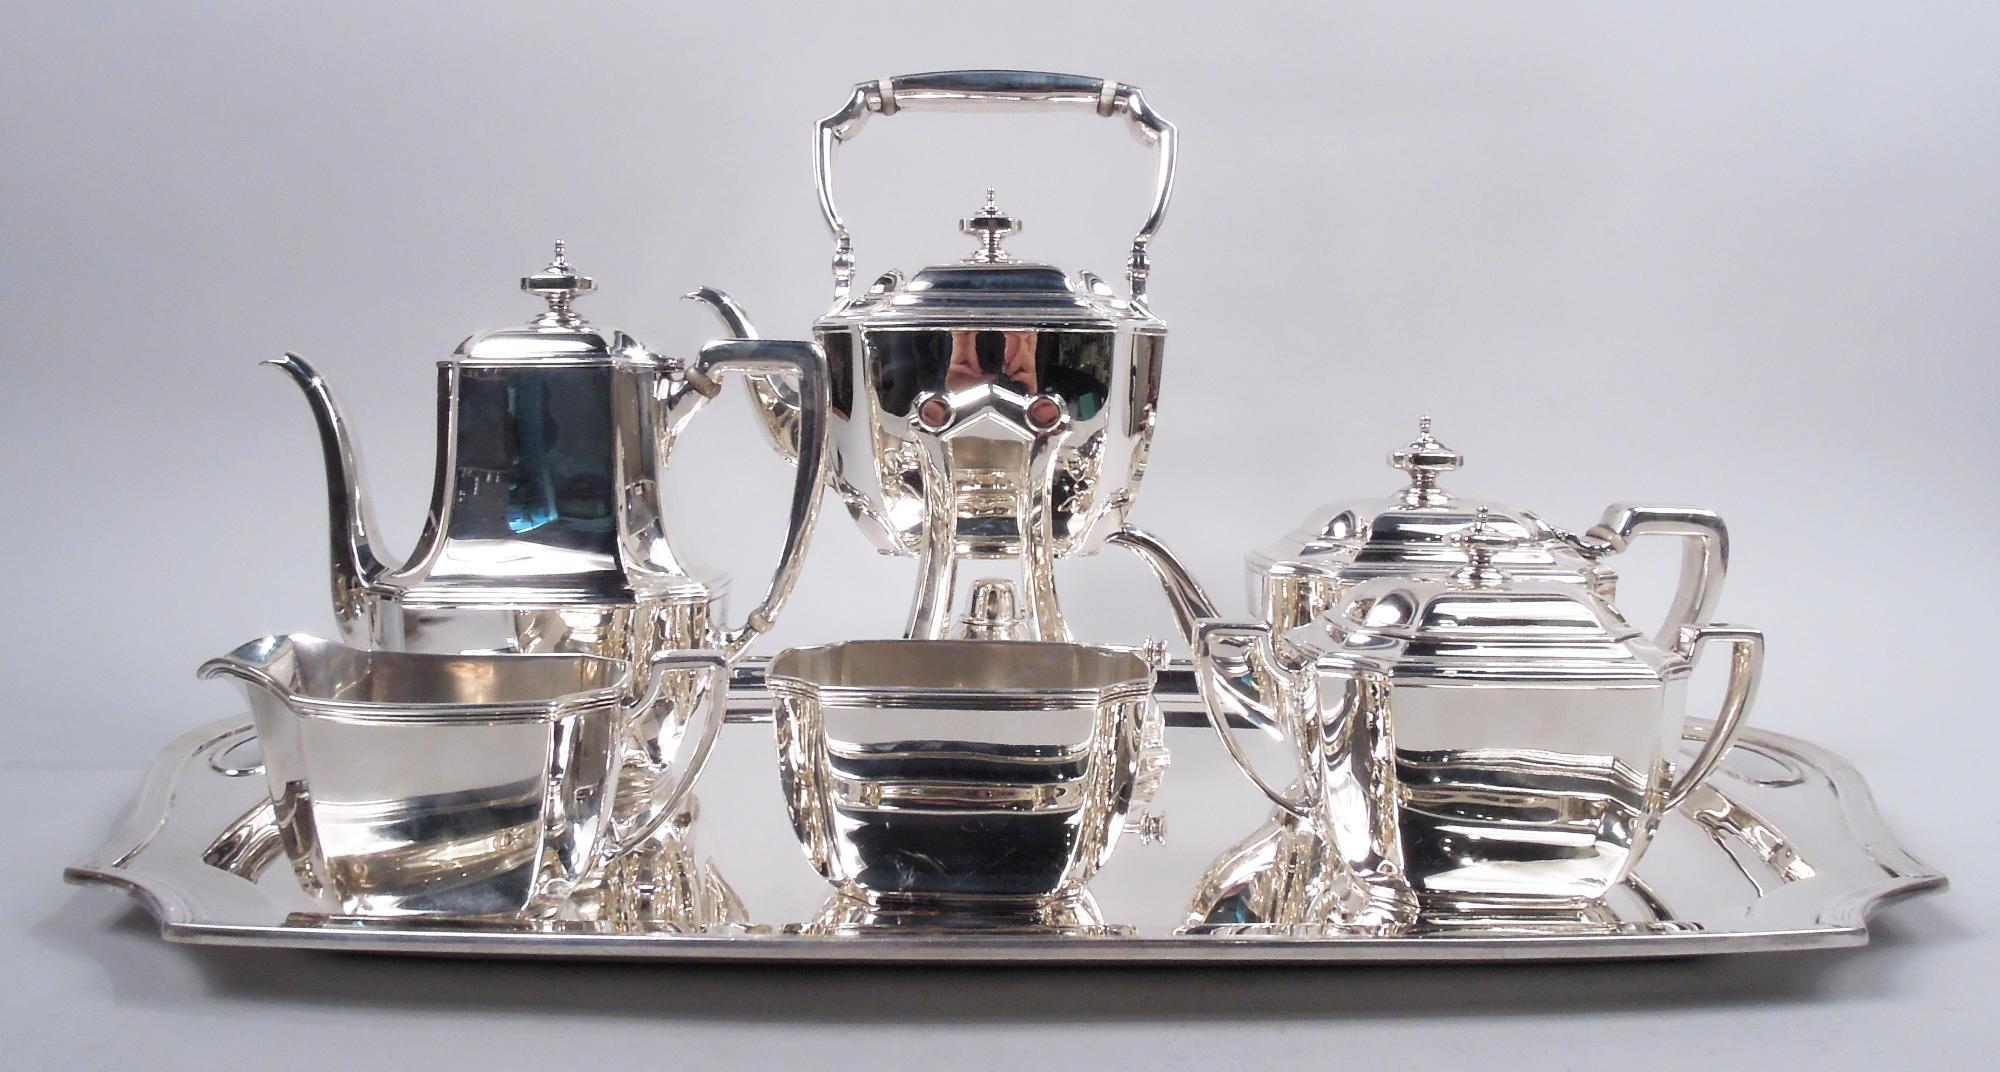 Hampton sterling silver coffee and tea set on tray. Made by Tiffany & Co. in New York, ca 1930. This set comprises 7 pieces: Hot water kettle on stand, coffeepot, teapot, creamer, sugar, and waste bowl on tray. Rectilinear with gently curved sides